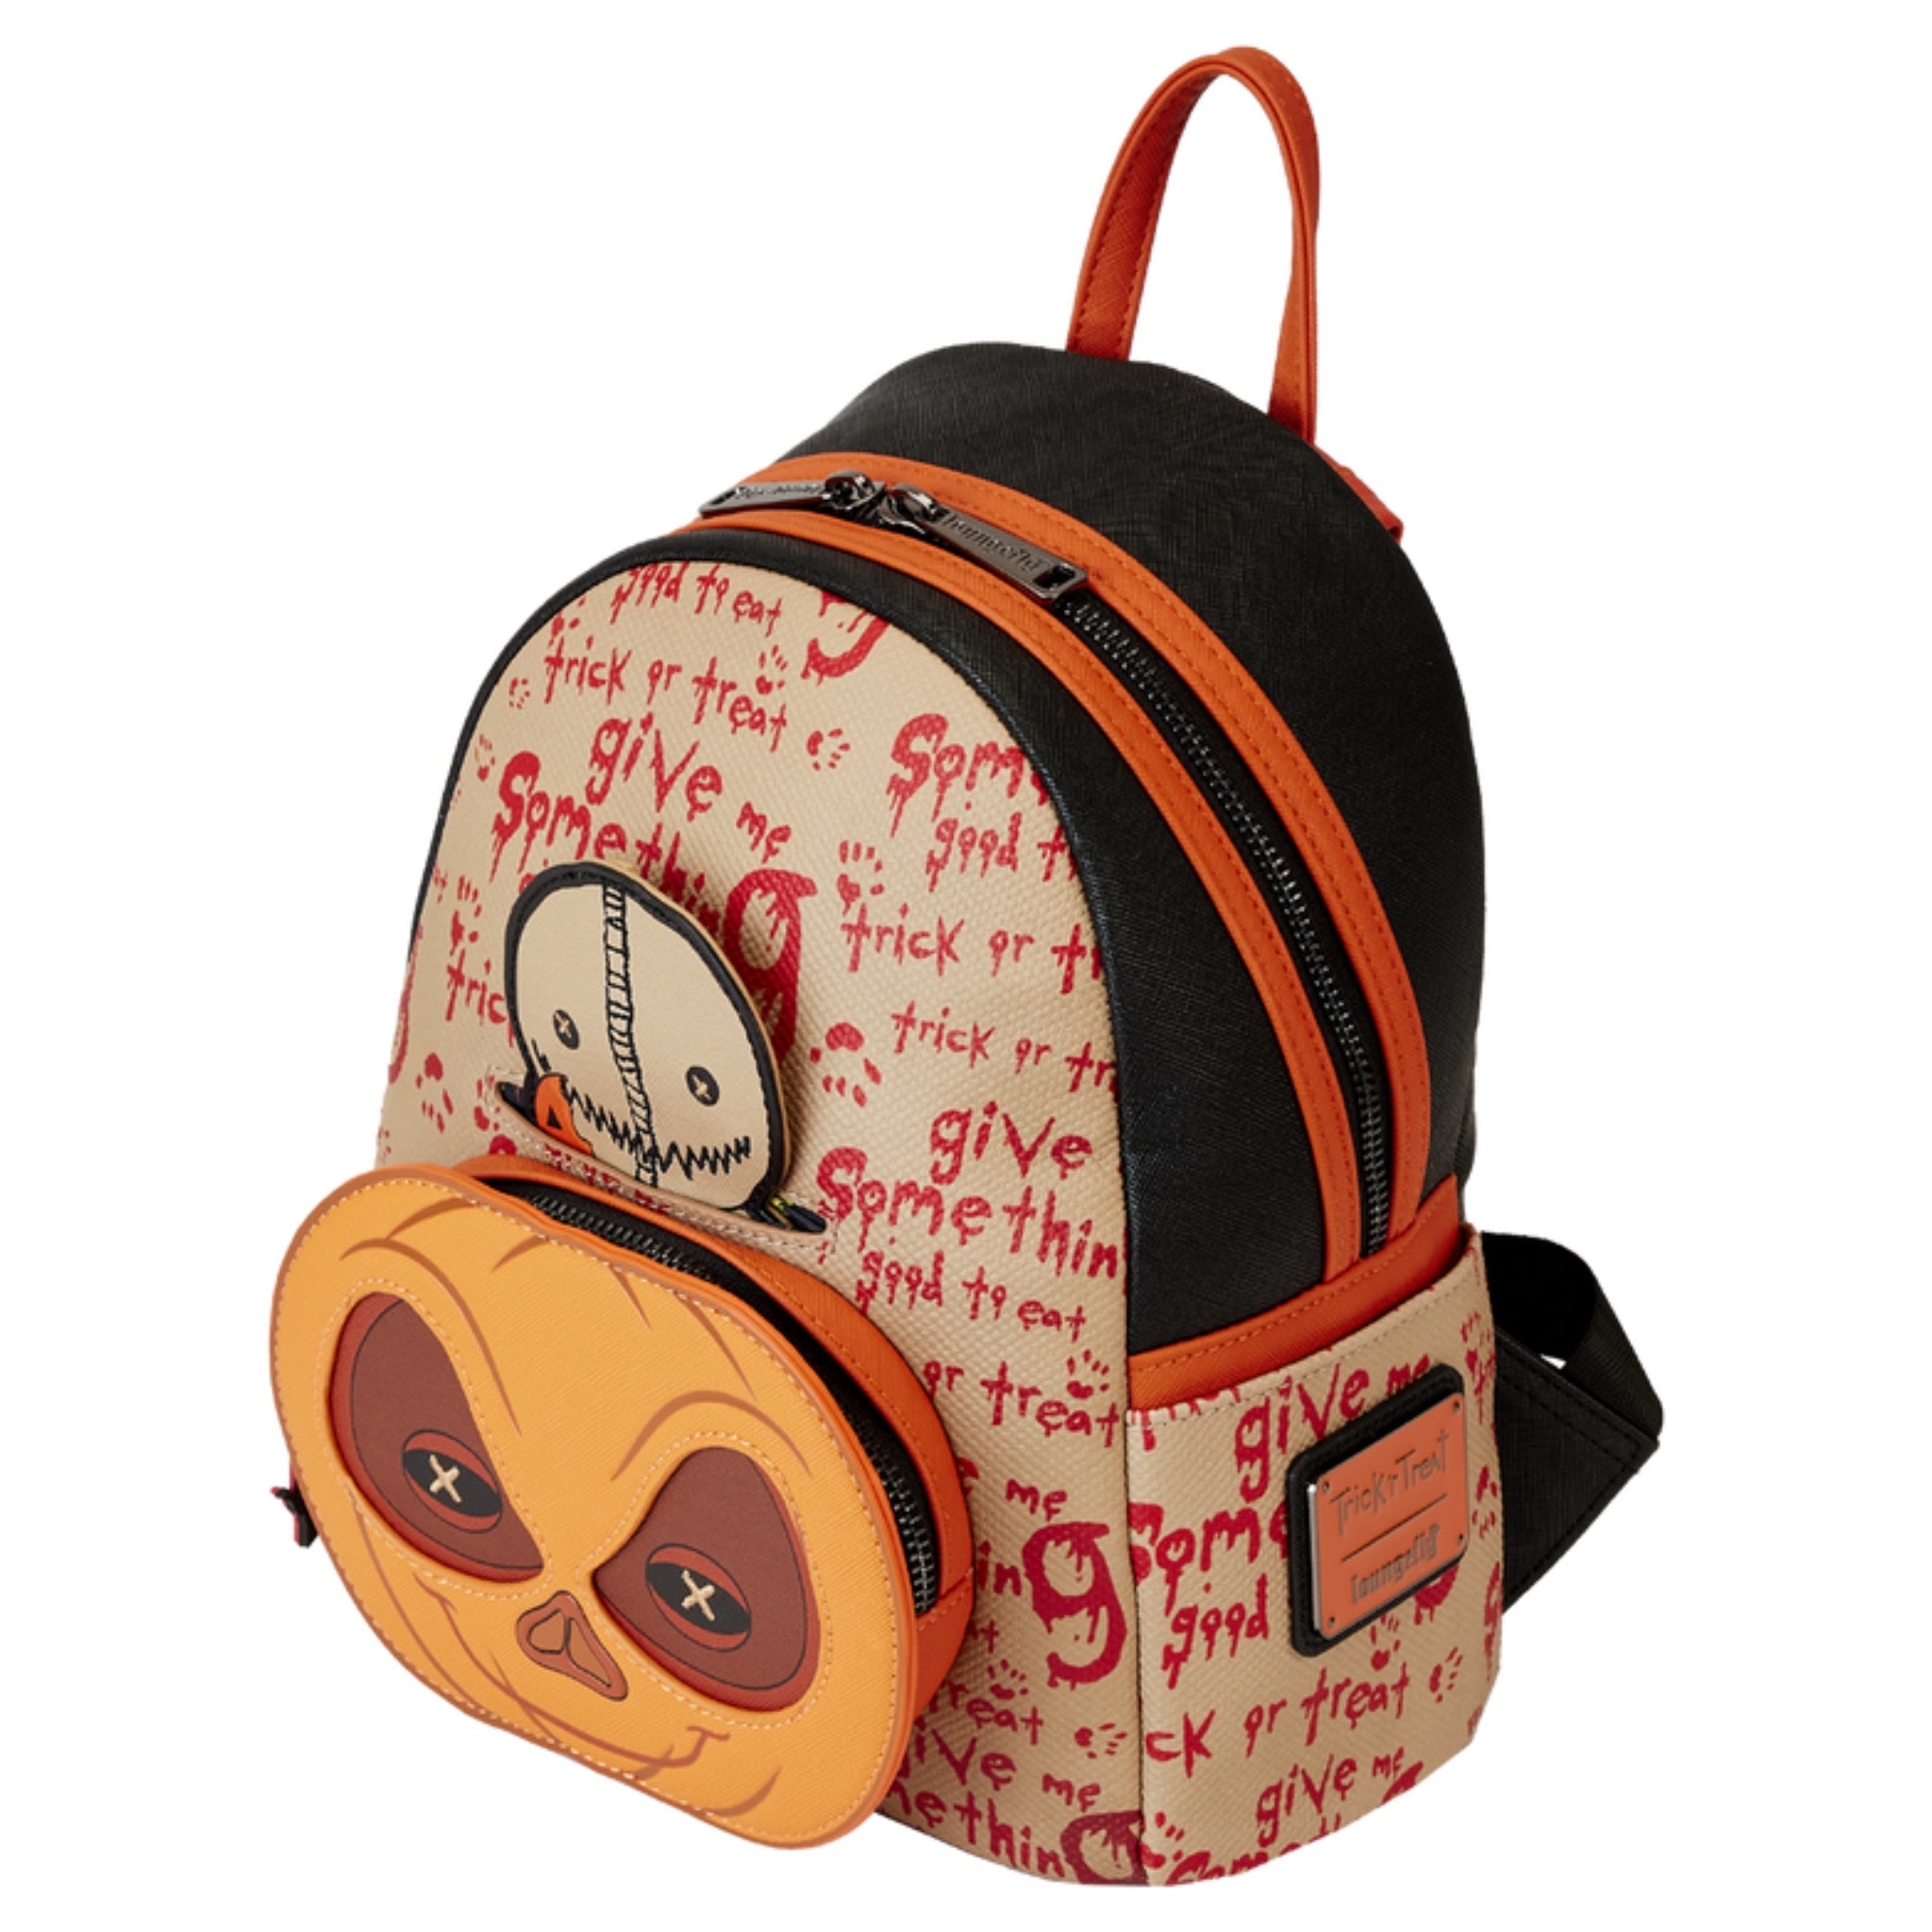 Loungefly Legendary Pictures Trick R Treat Pumpkin Mini Backpack